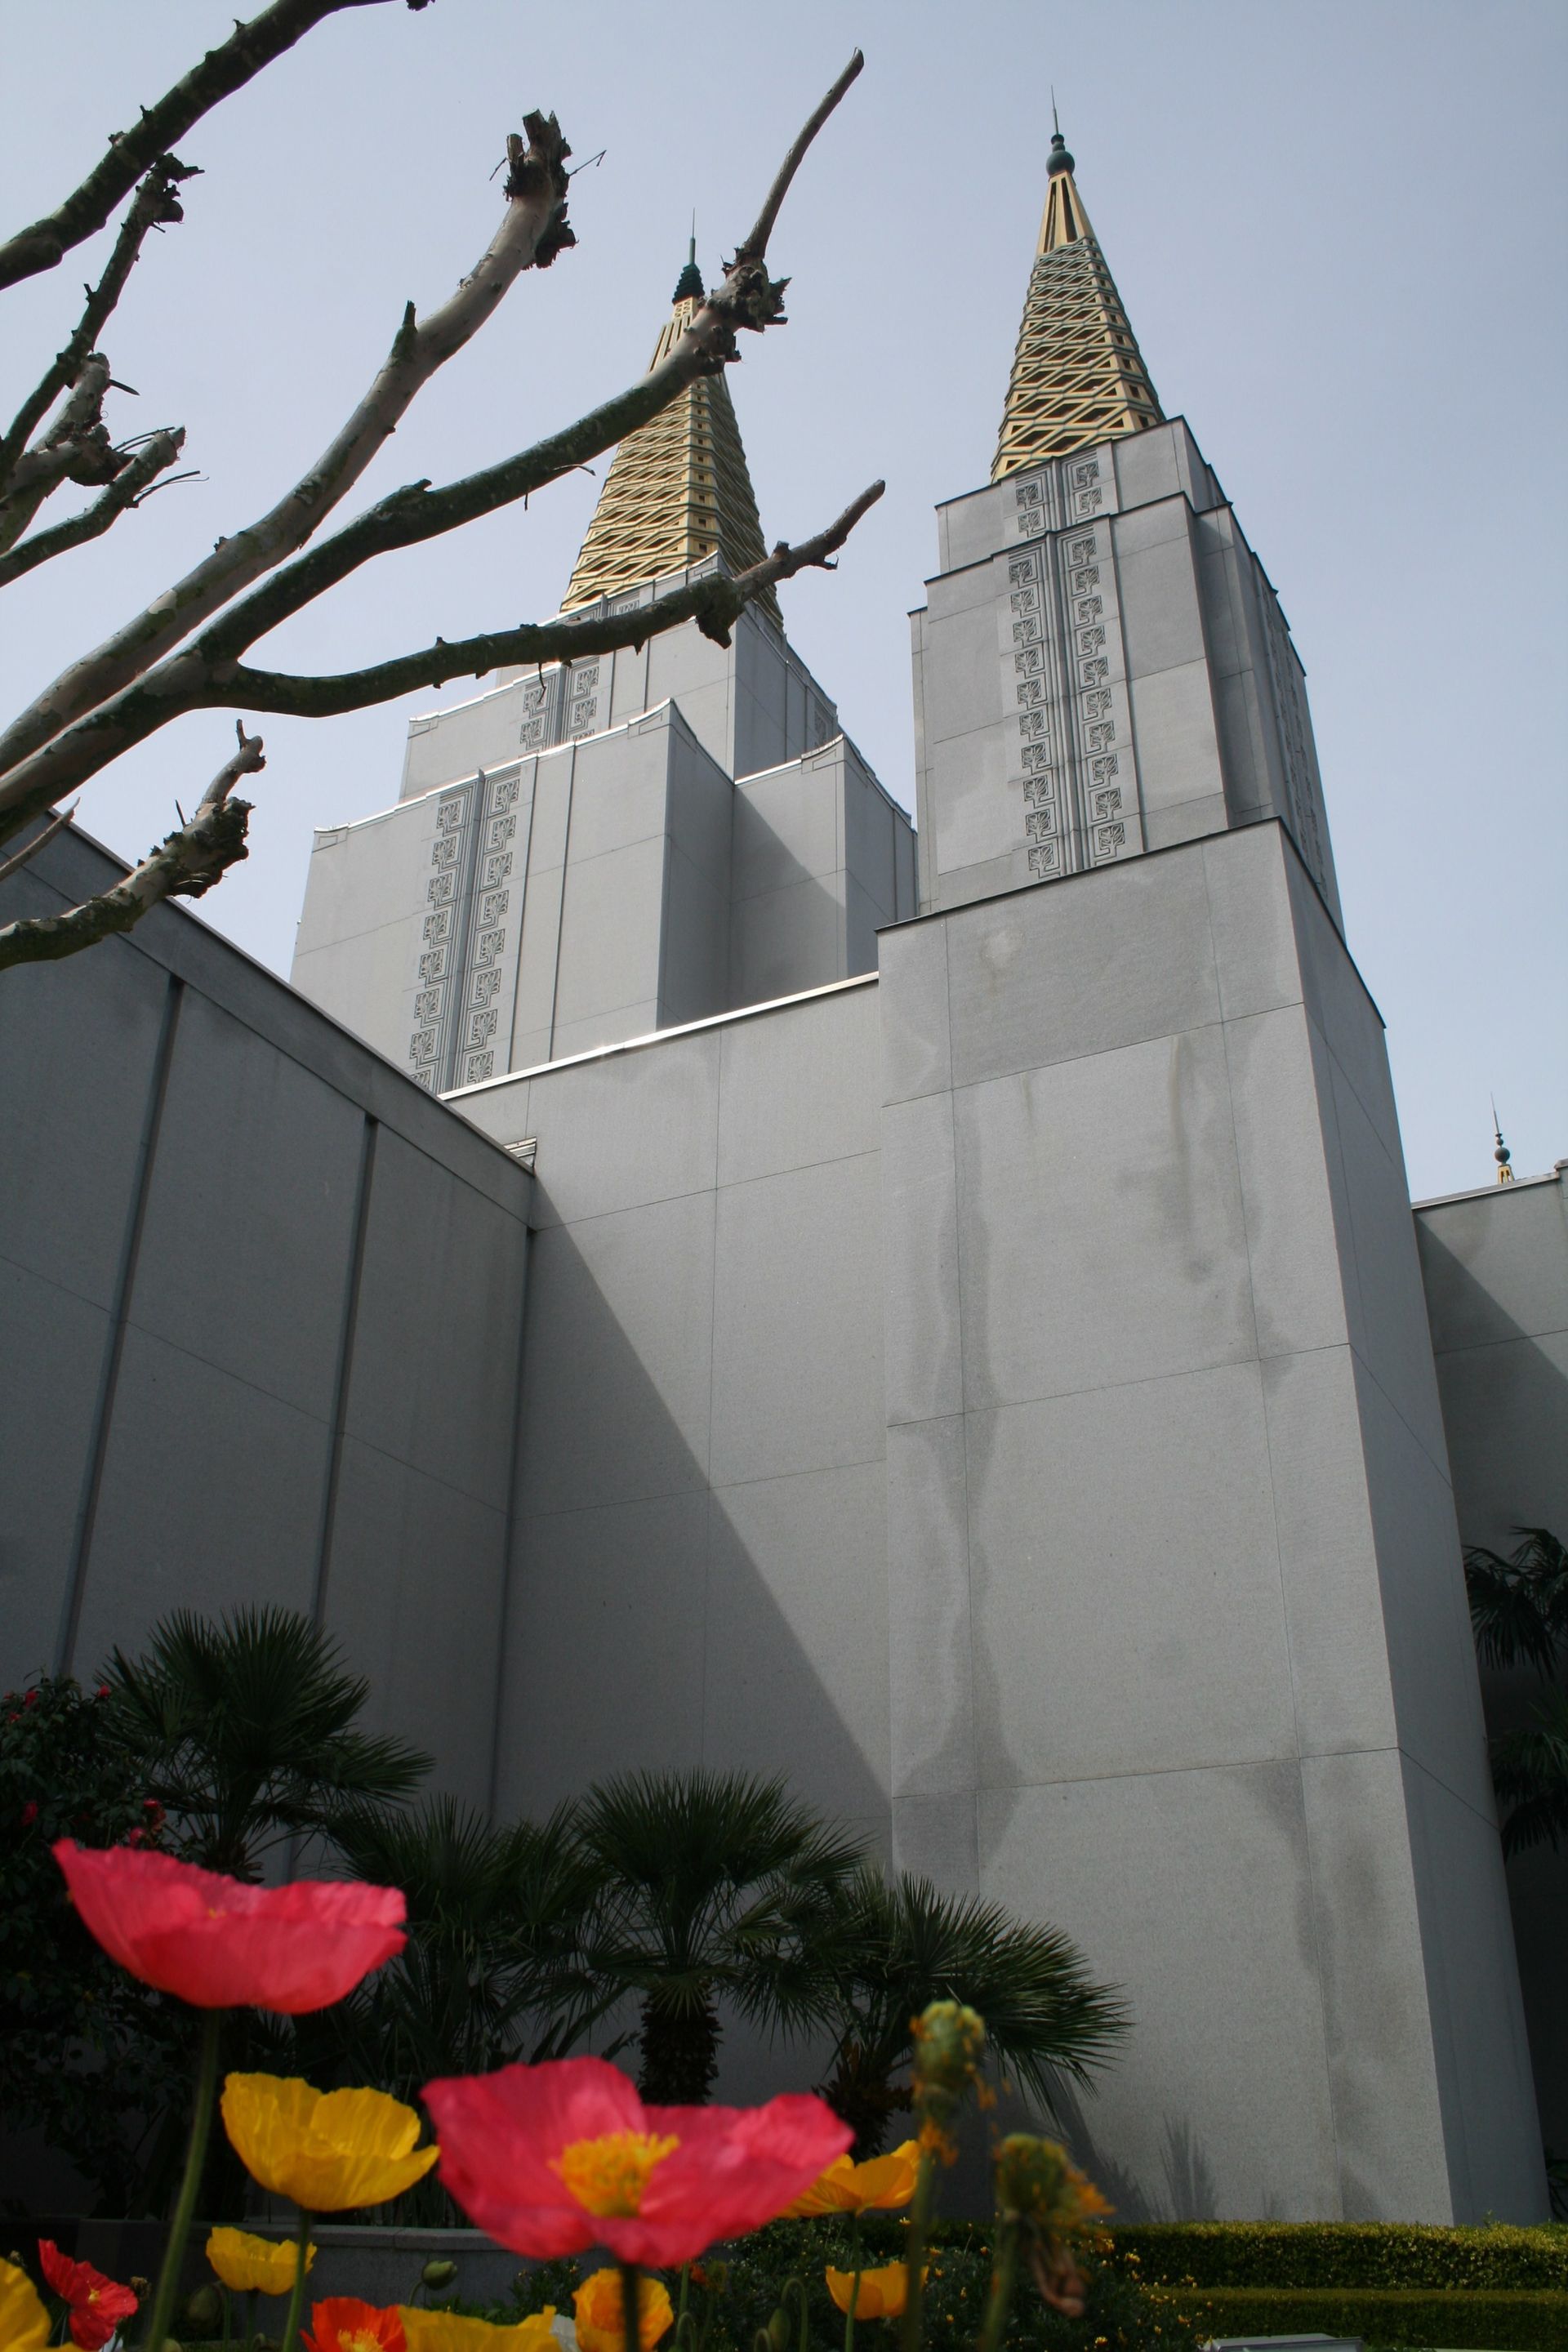 The Oakland California Temple spires, including scenery and the exterior of the temple.